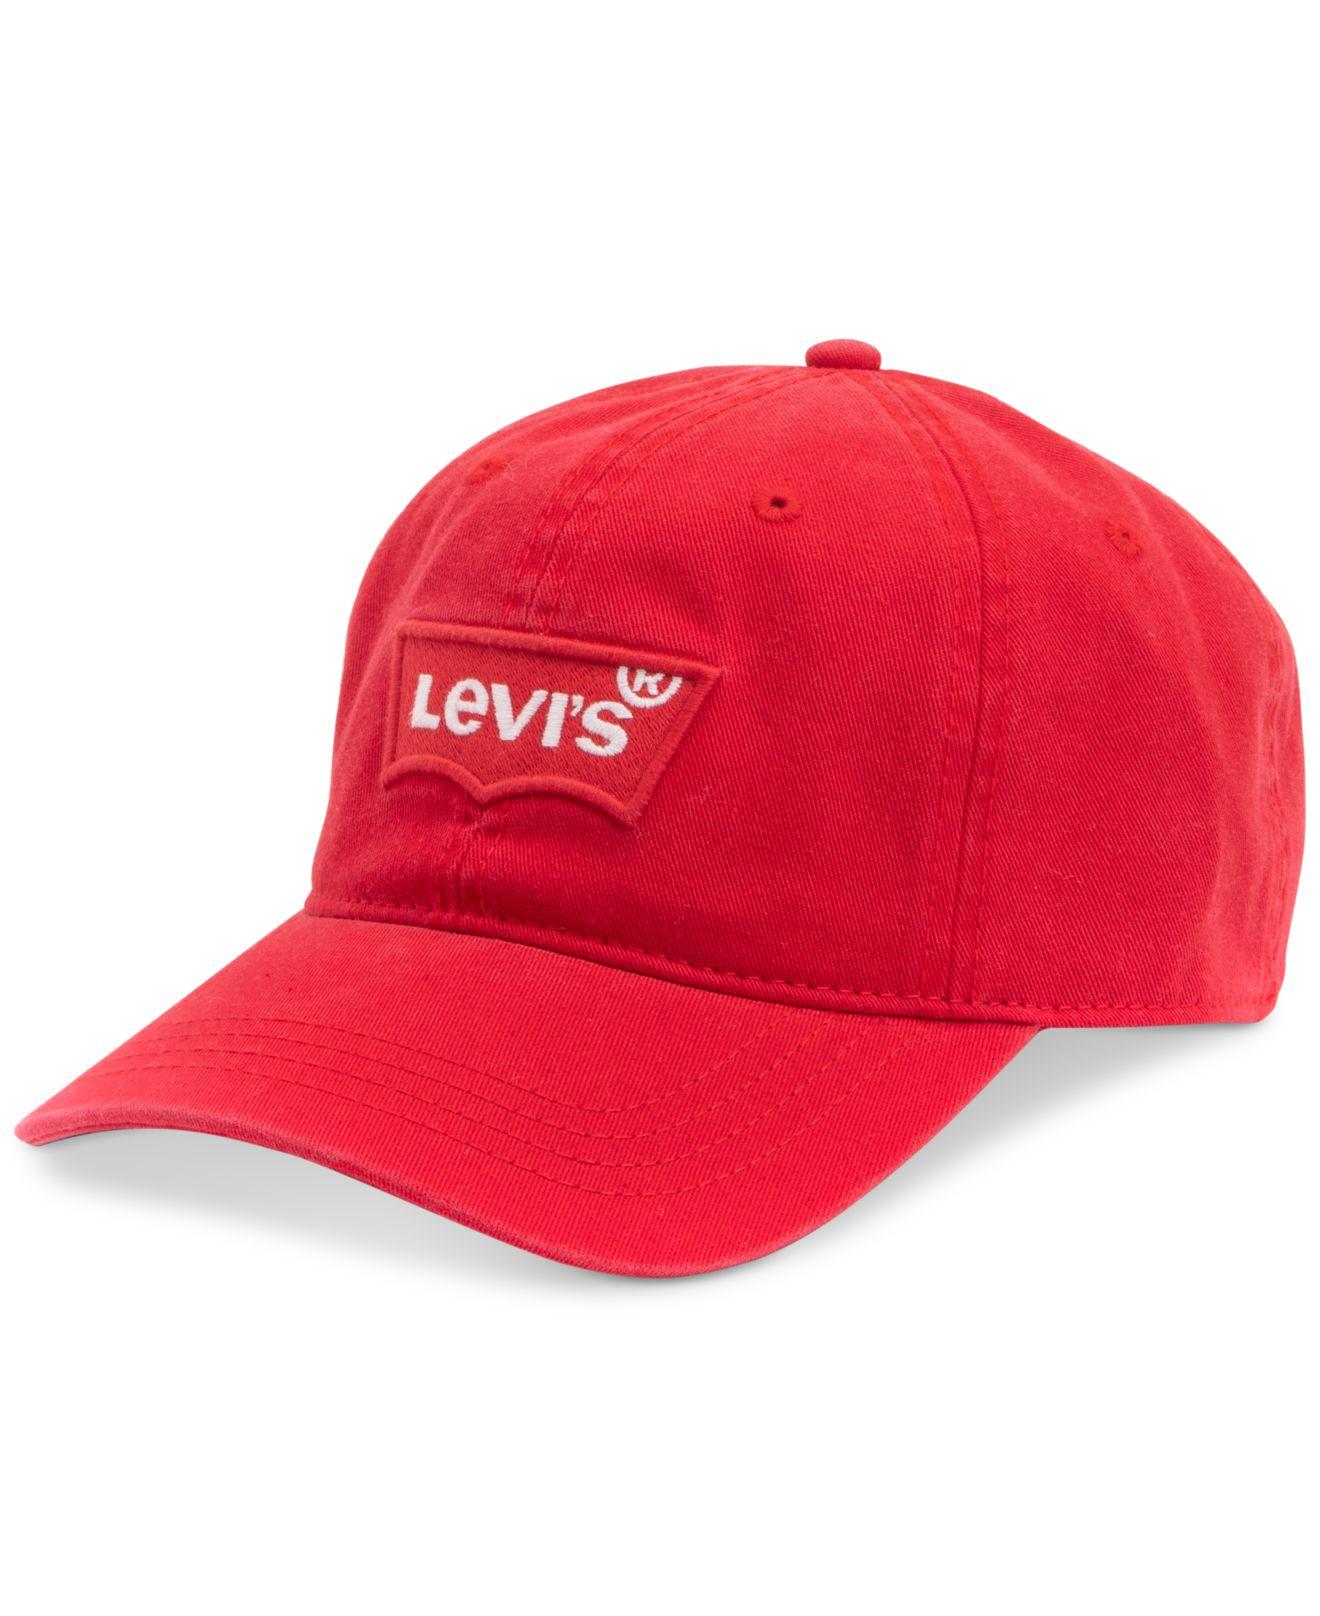 Levi's Large Batwing Baseball Hat in Red for Men - Lyst